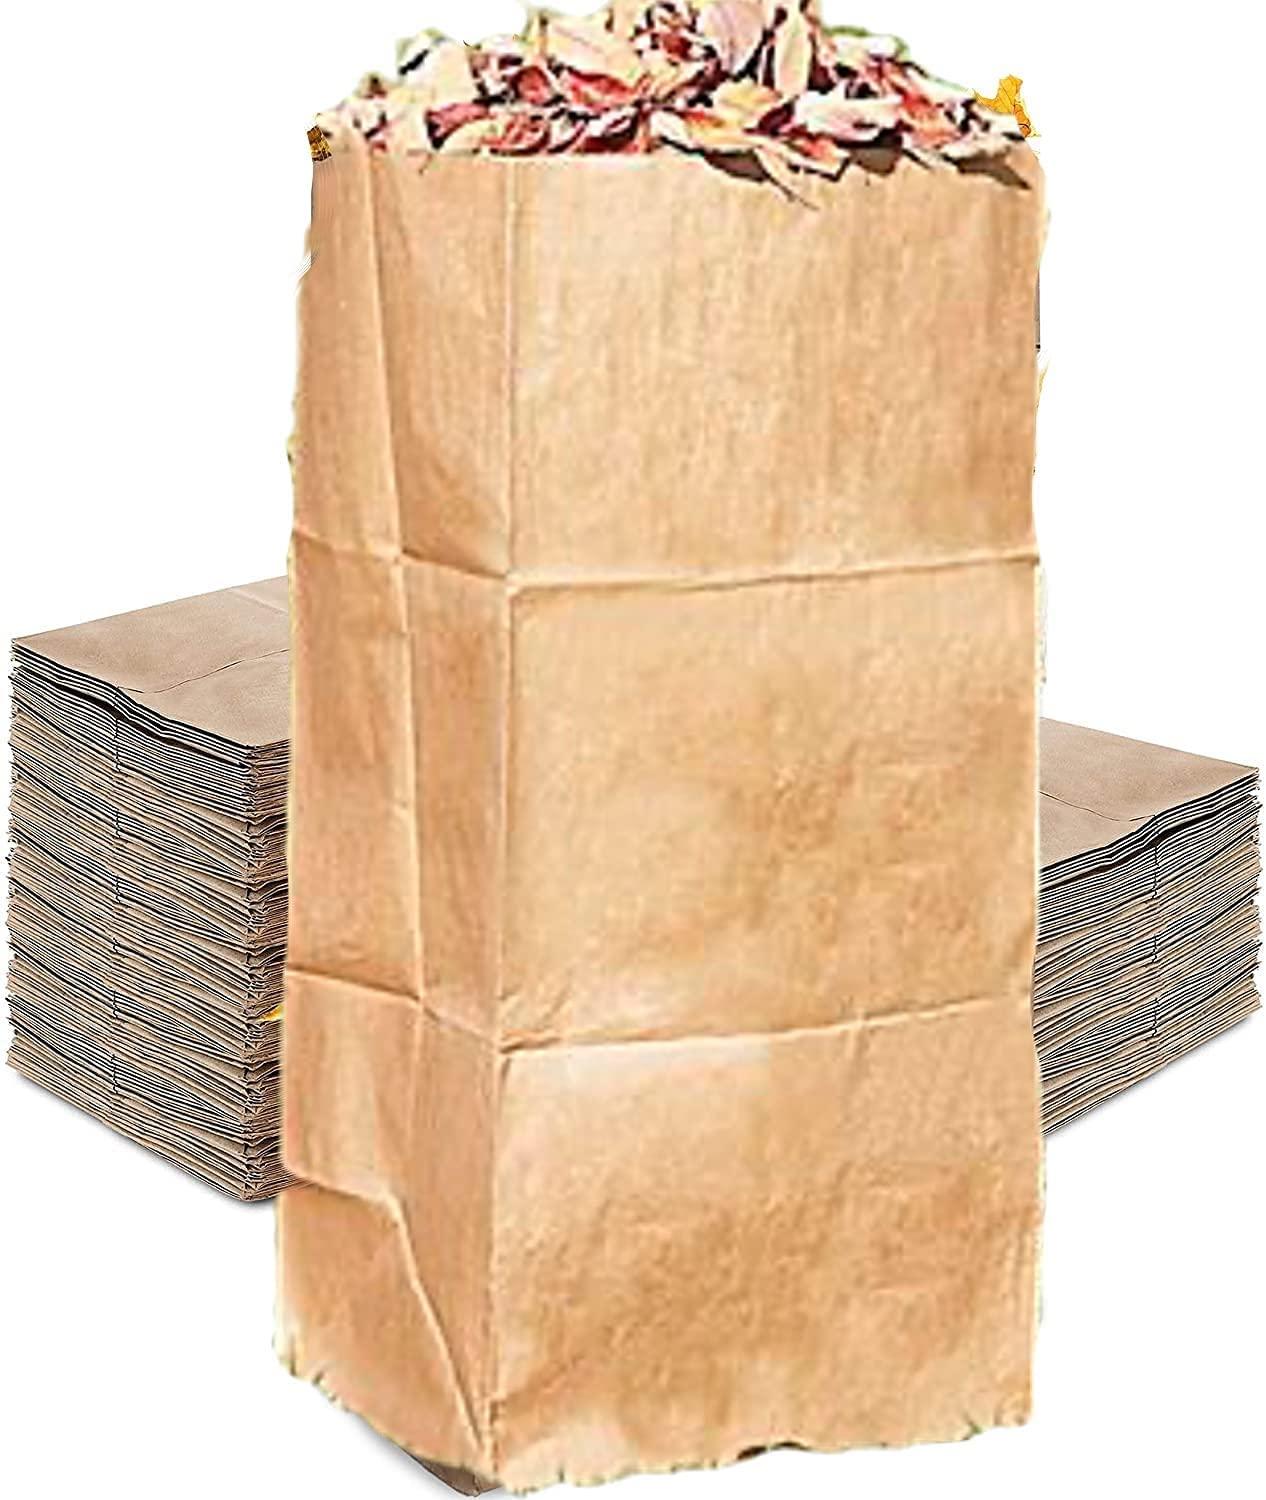 Rocky Mountain Goods Yard Waste Bags - Large 30 Gallon Brown Paper